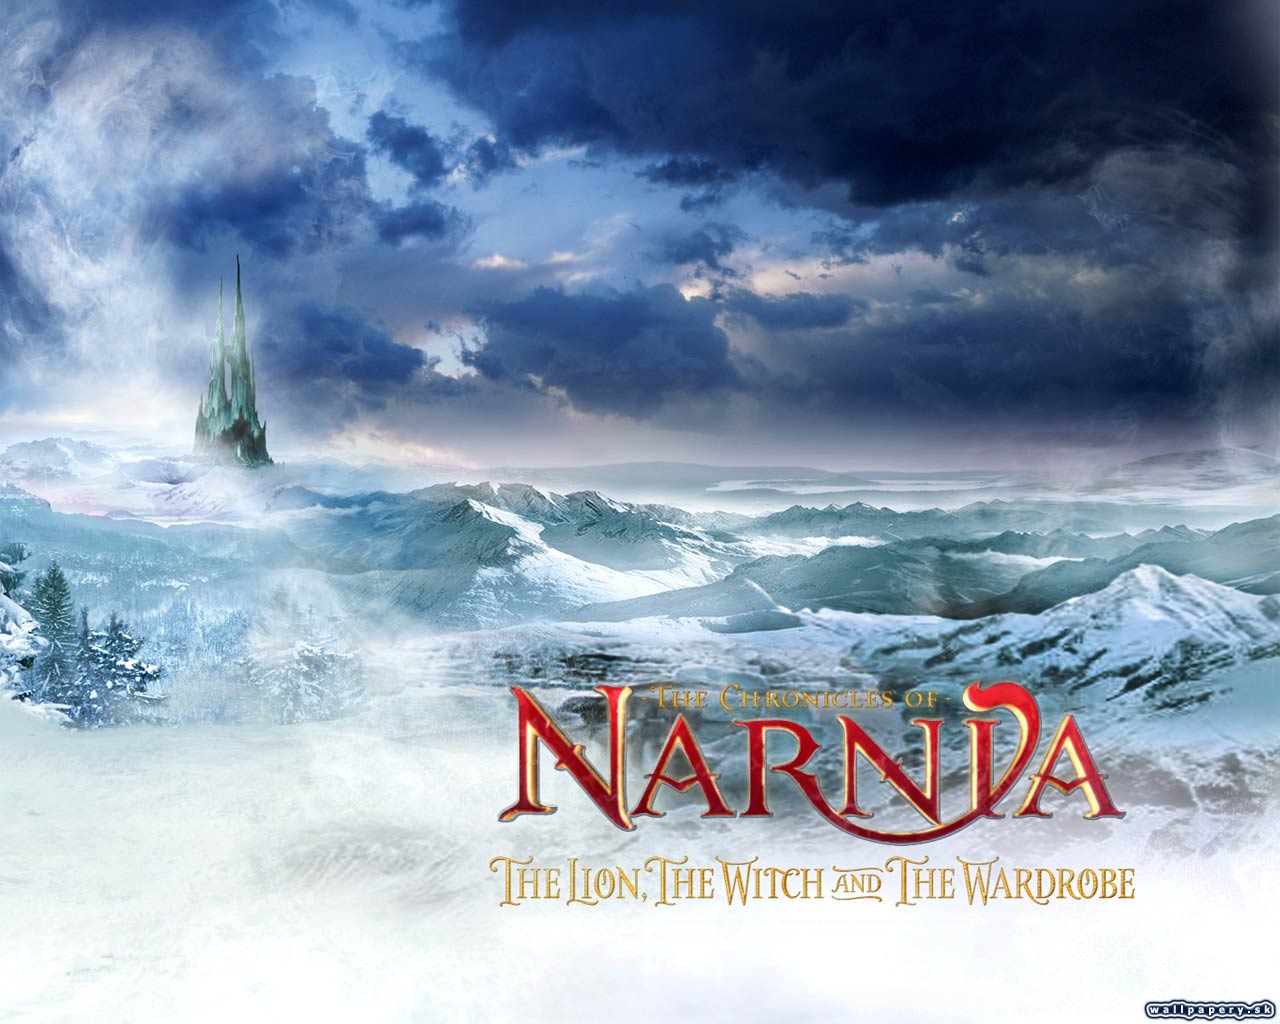 The Chronicles of Narnia: The Lion, The Witch and the Wardrobe - wallpaper 4